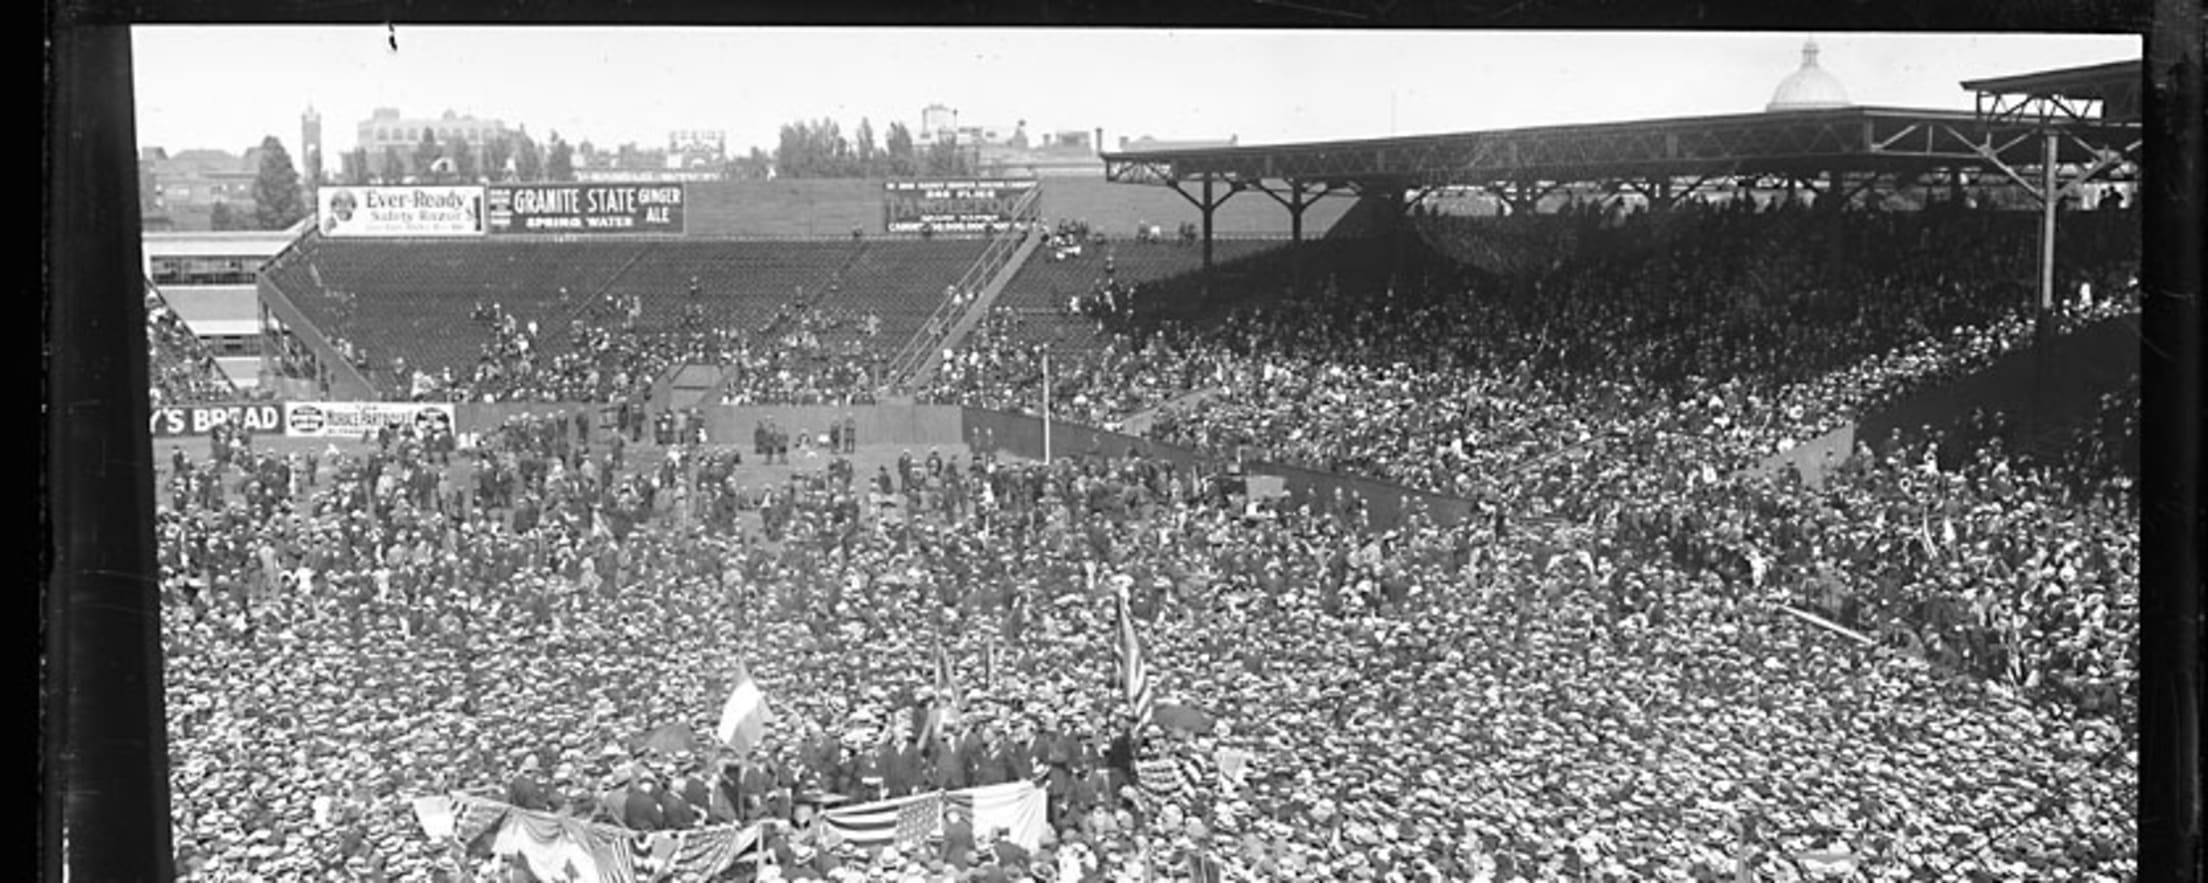 BostonAttitude on X: On this day in 1912 The first official, regular  season game was played at Fenway Park, between the Red Sox and New York  Highlanders that drew a crowd of